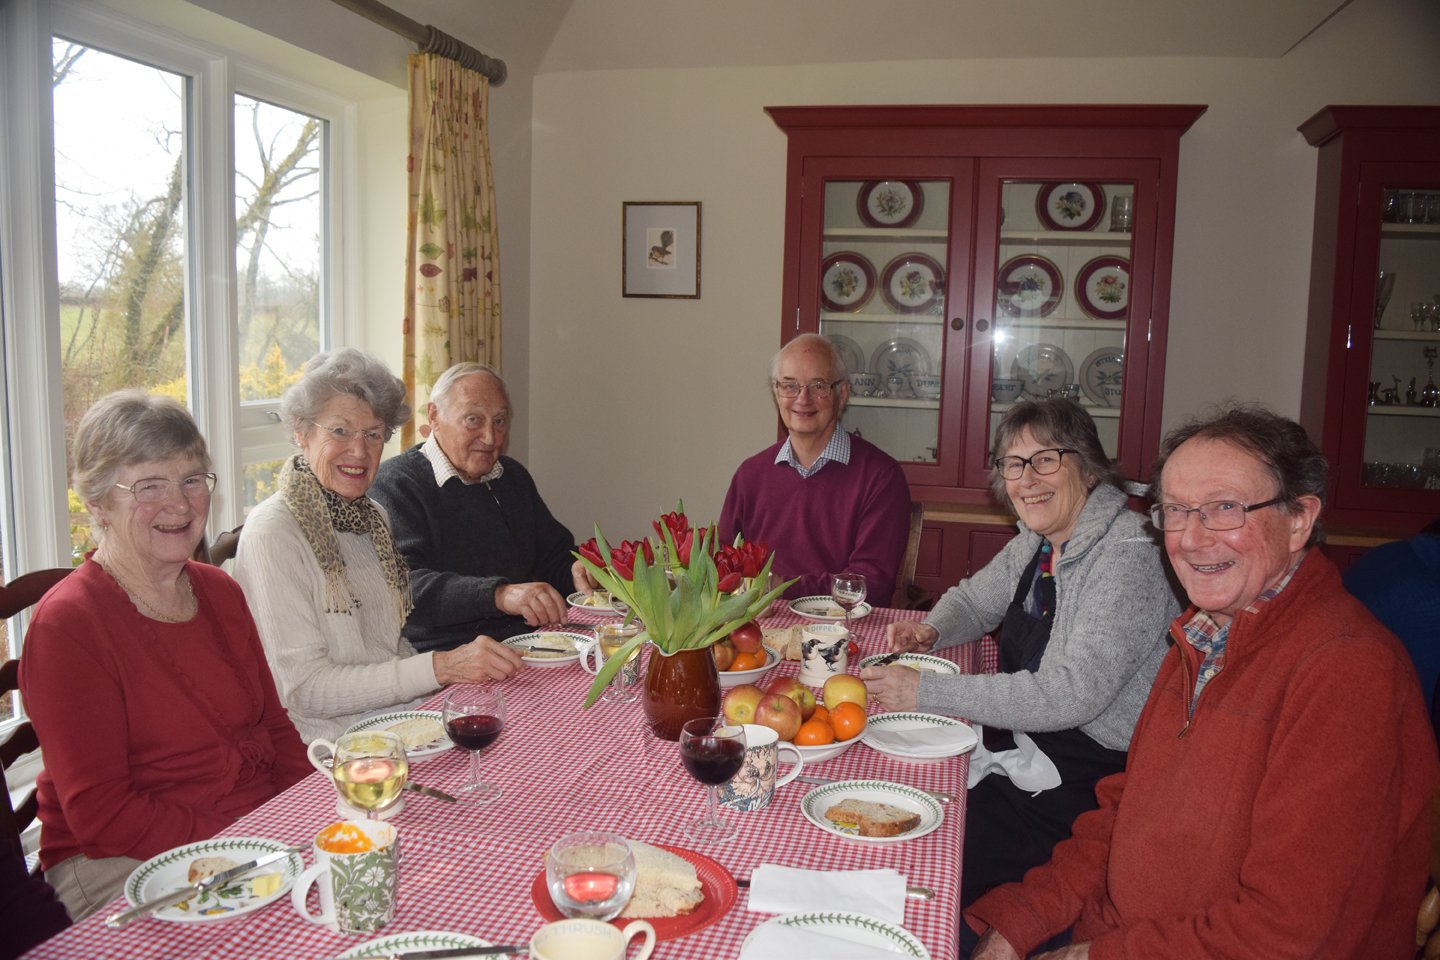 Lent lunch 2018 in aid of Stone pillow Charity from st giles graffham